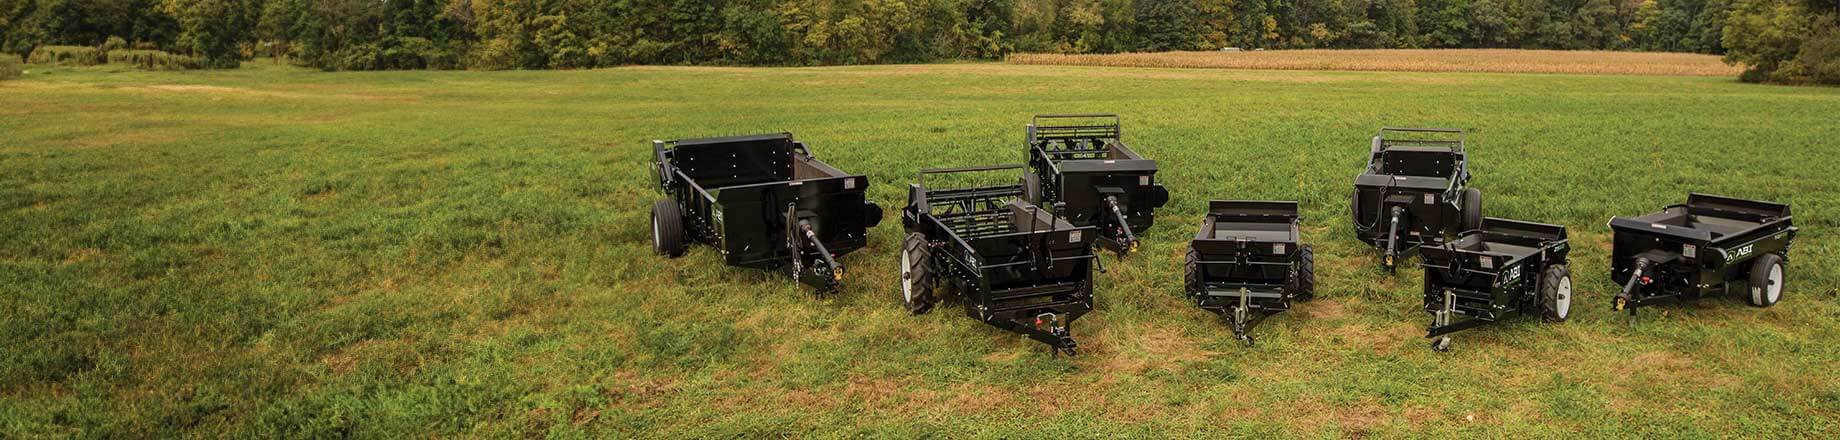 Image of manure spreaders size options